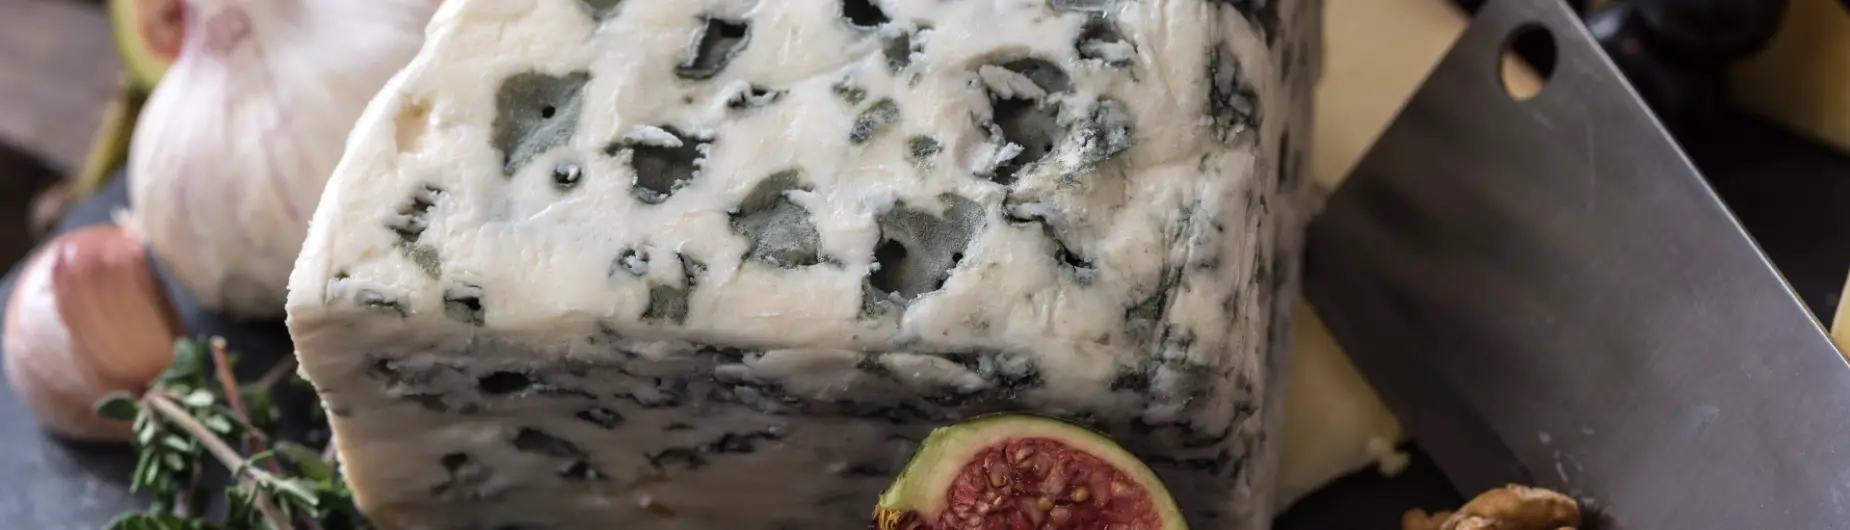 Can You Eat Cheese on The Ketogenic Diet?